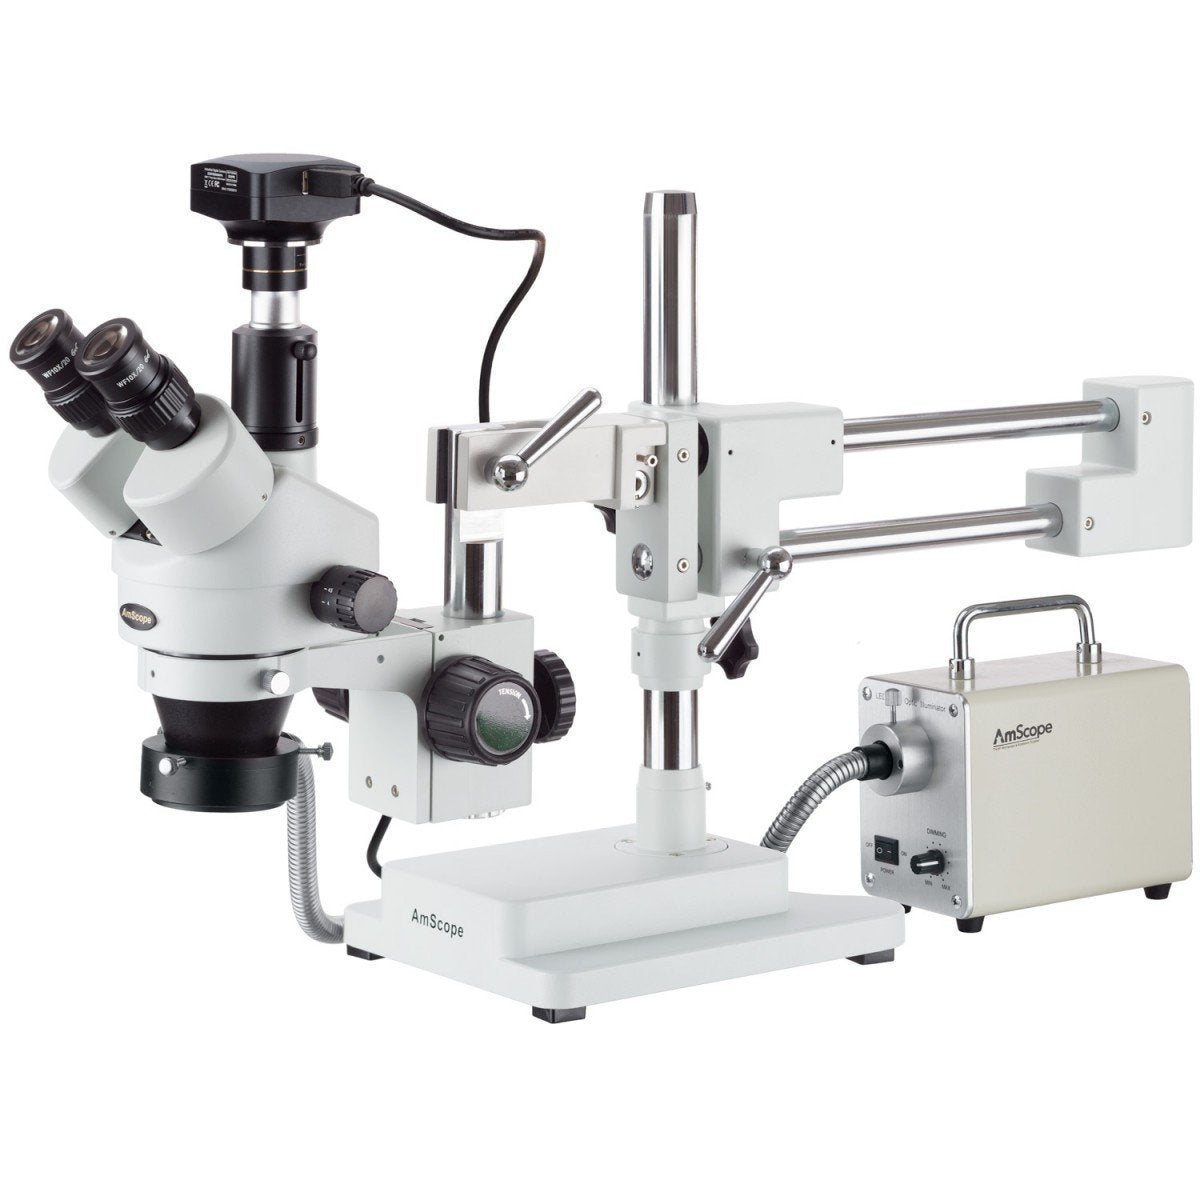 AmScope 3.5X-90X Zoom Stereo Trinocular Microscope with LED Fiber Optic Ring Light and 6.3MP High-speed USB3 Camera